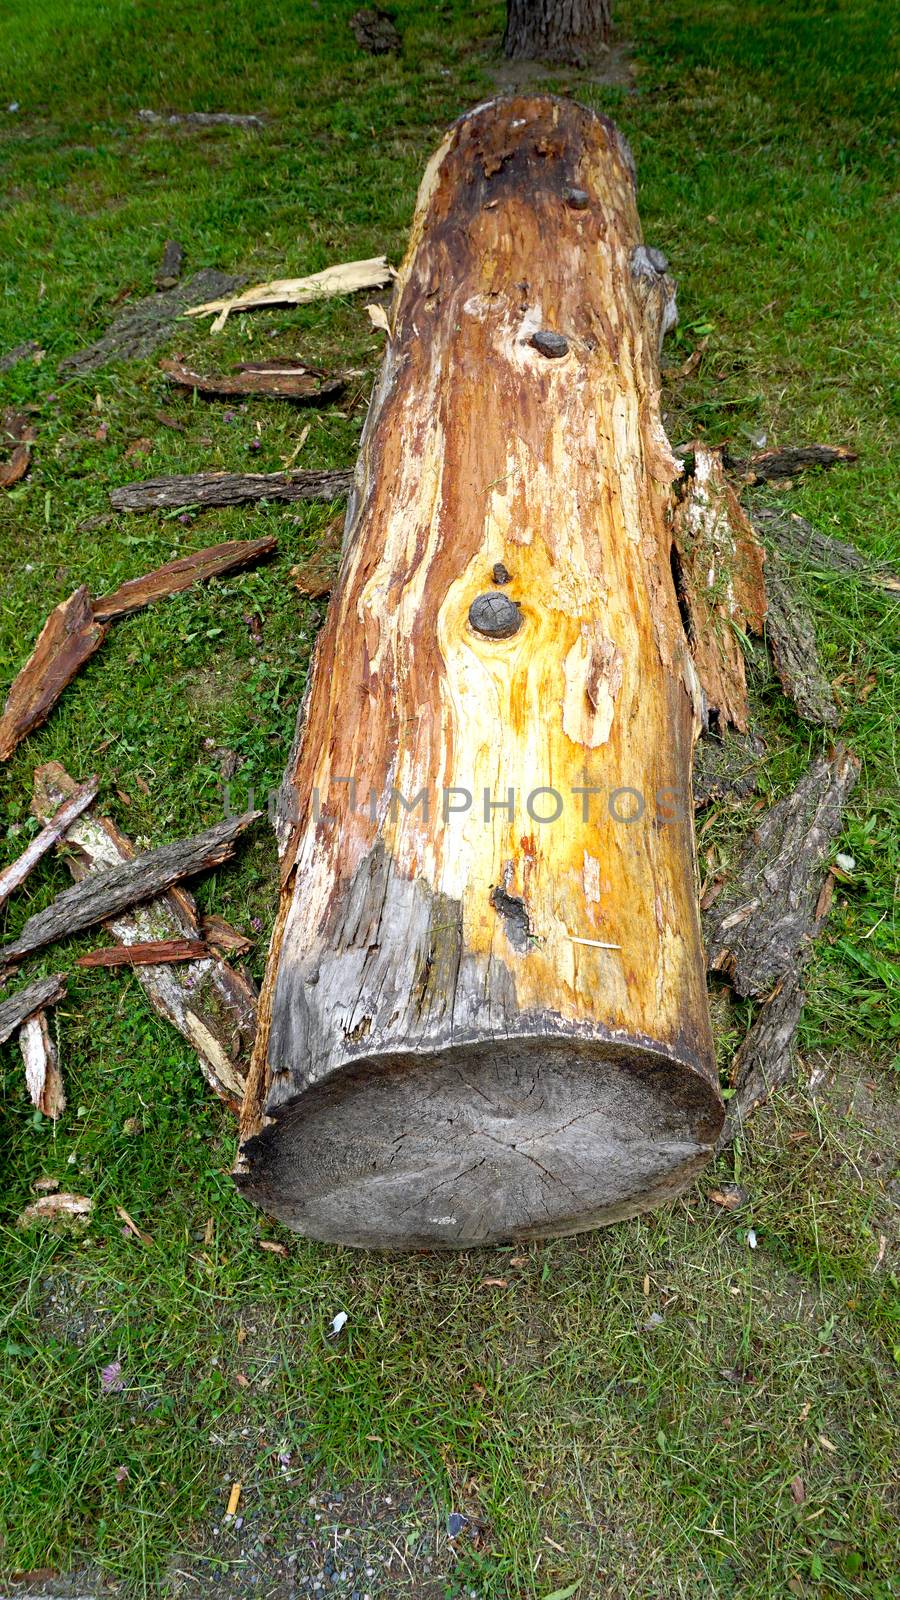 wooden log firewood on the grass field vertical by polarbearstudio